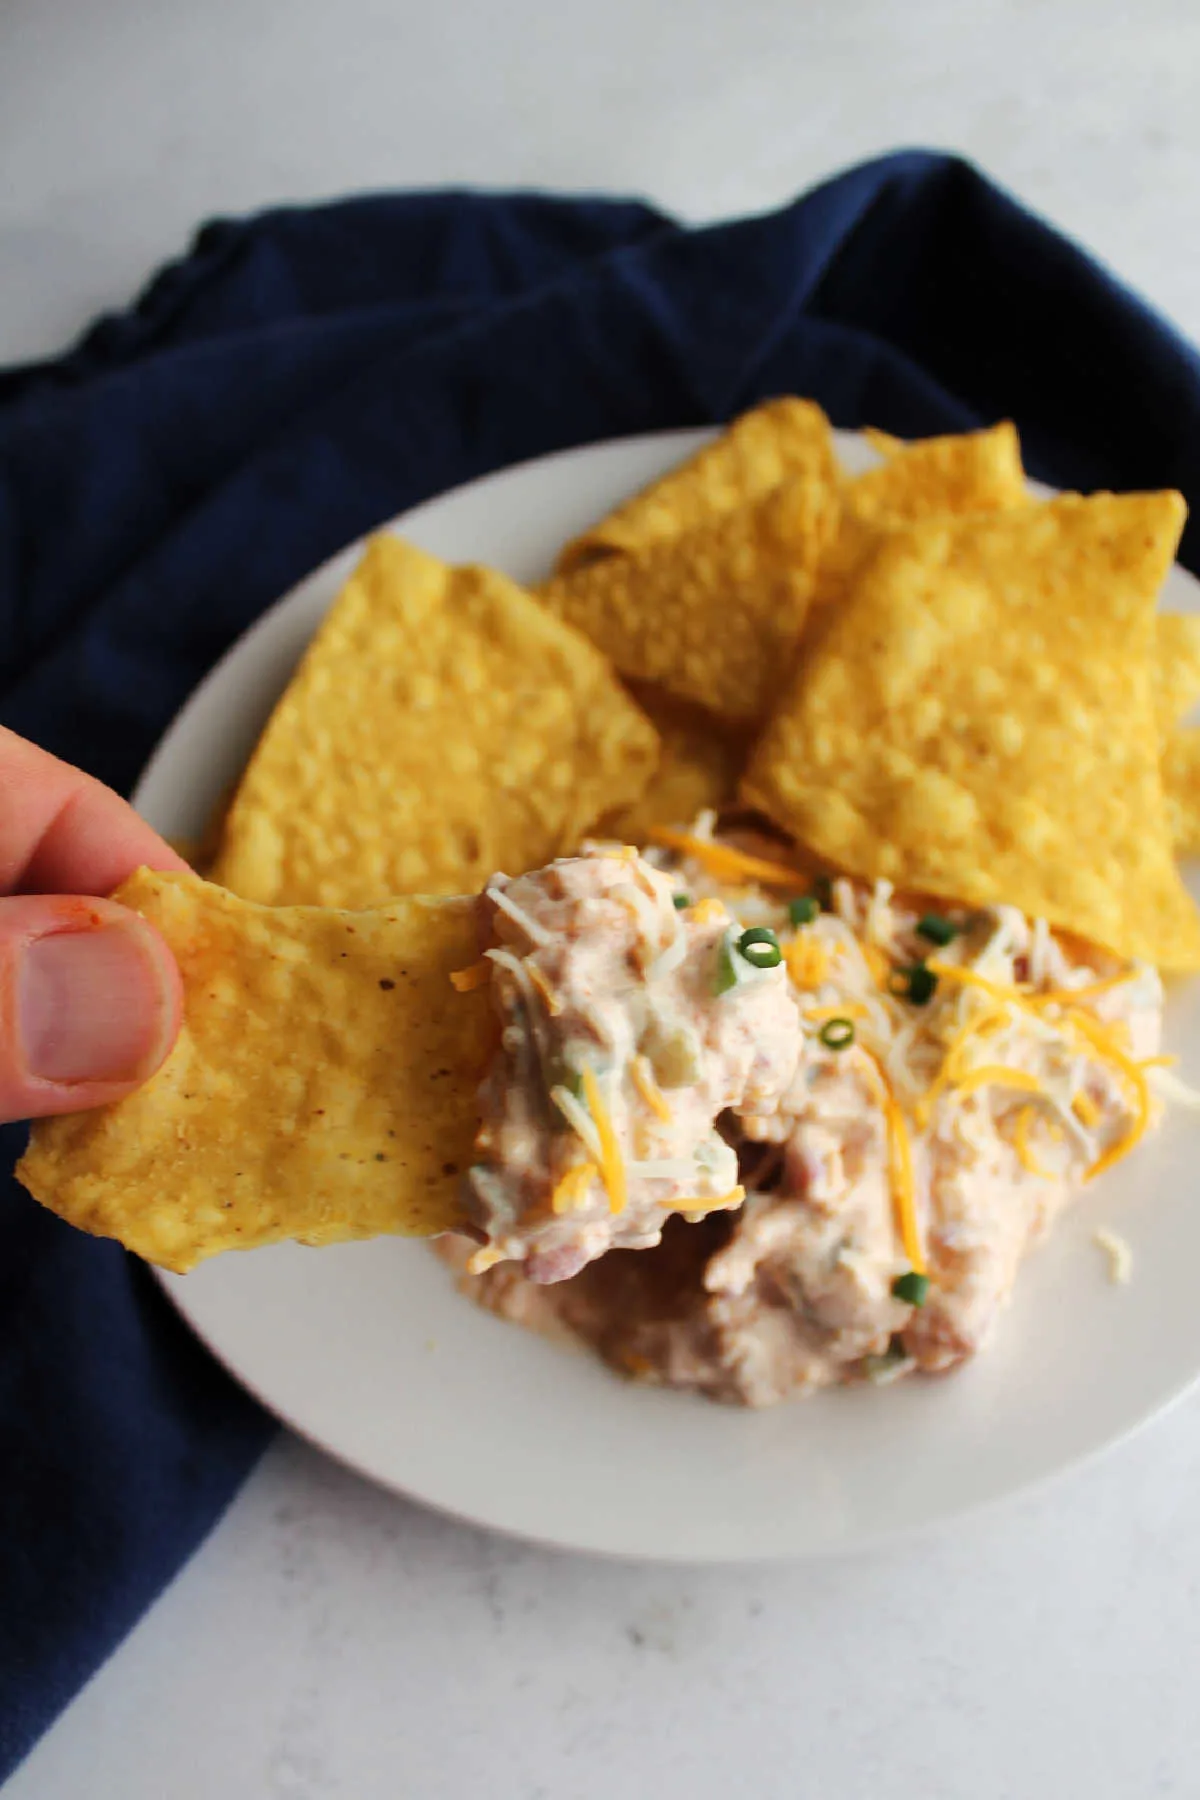 Hand dipping chip into cheesy sour cream dip.